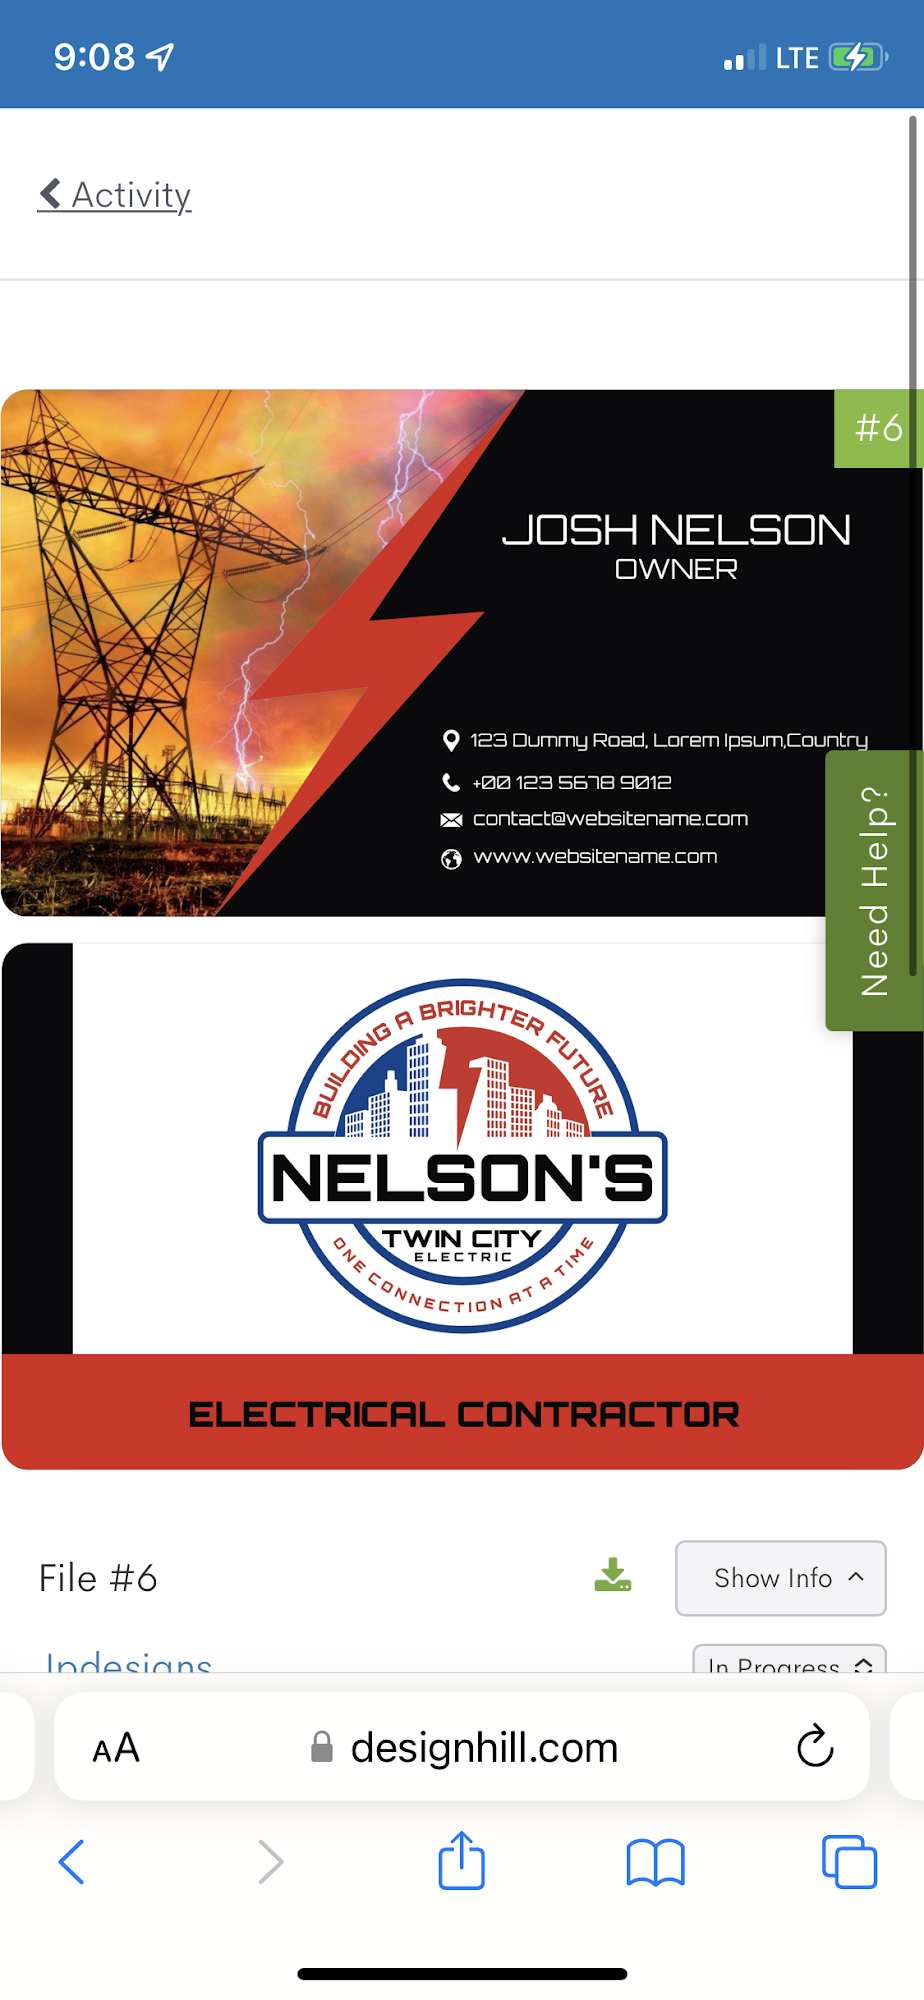 Nelson’s Twin City Electric INC.